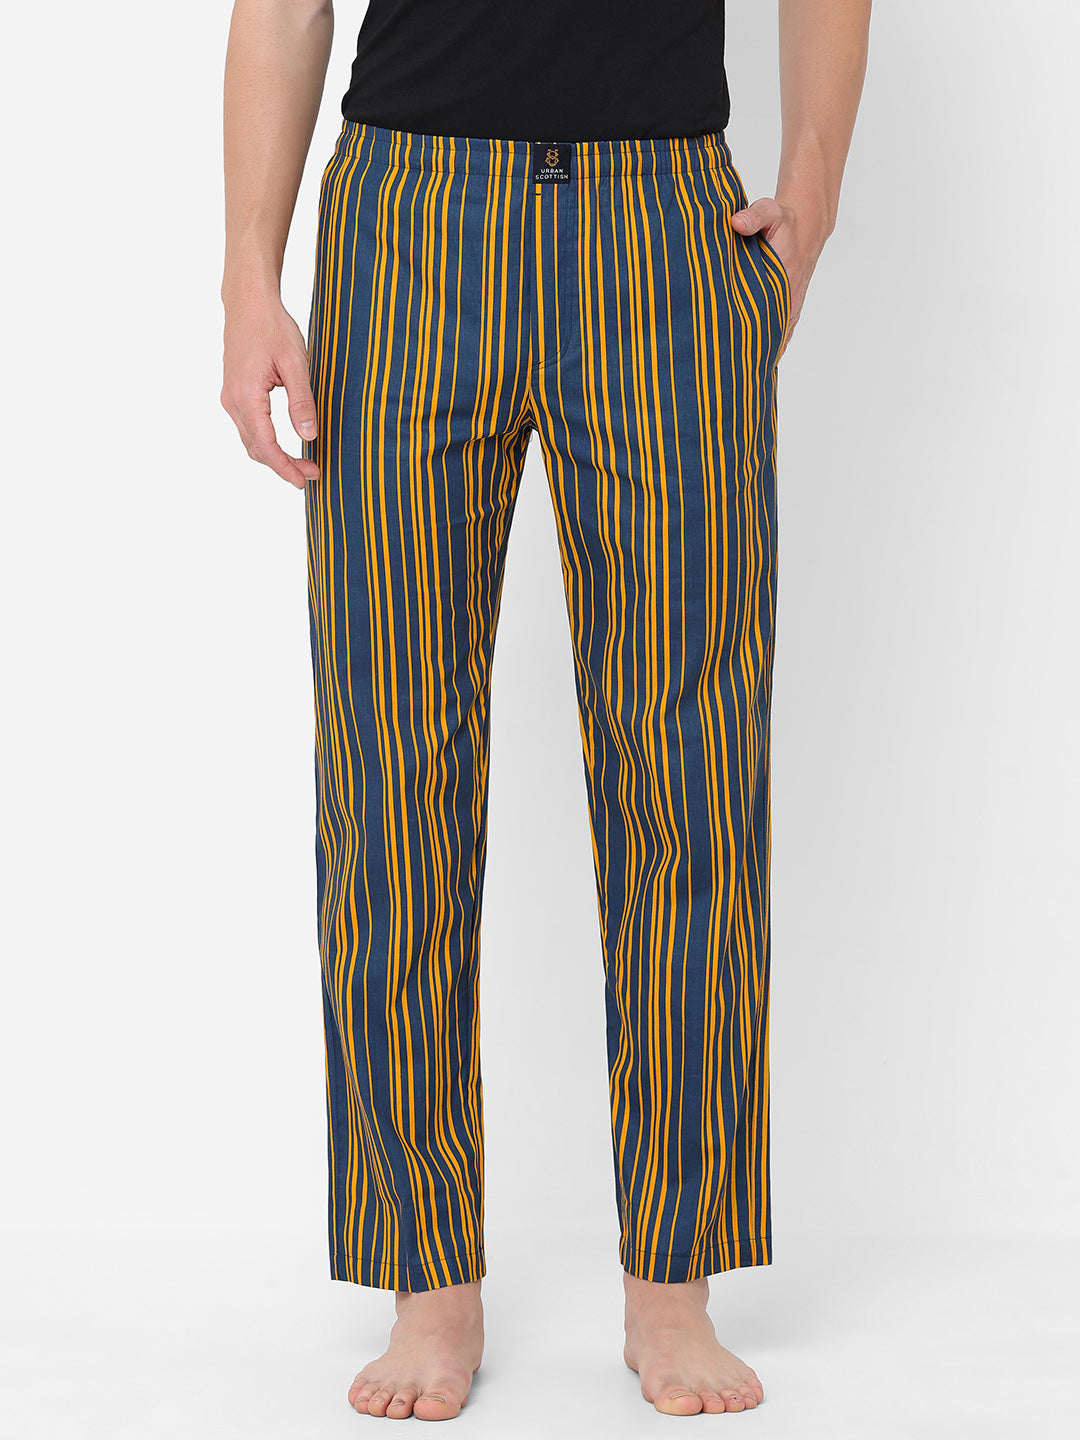 Men's Striped, Yellow, Cotton, Regular Fit, Elasticated, Waistband, Pyjama  With Side Pockets